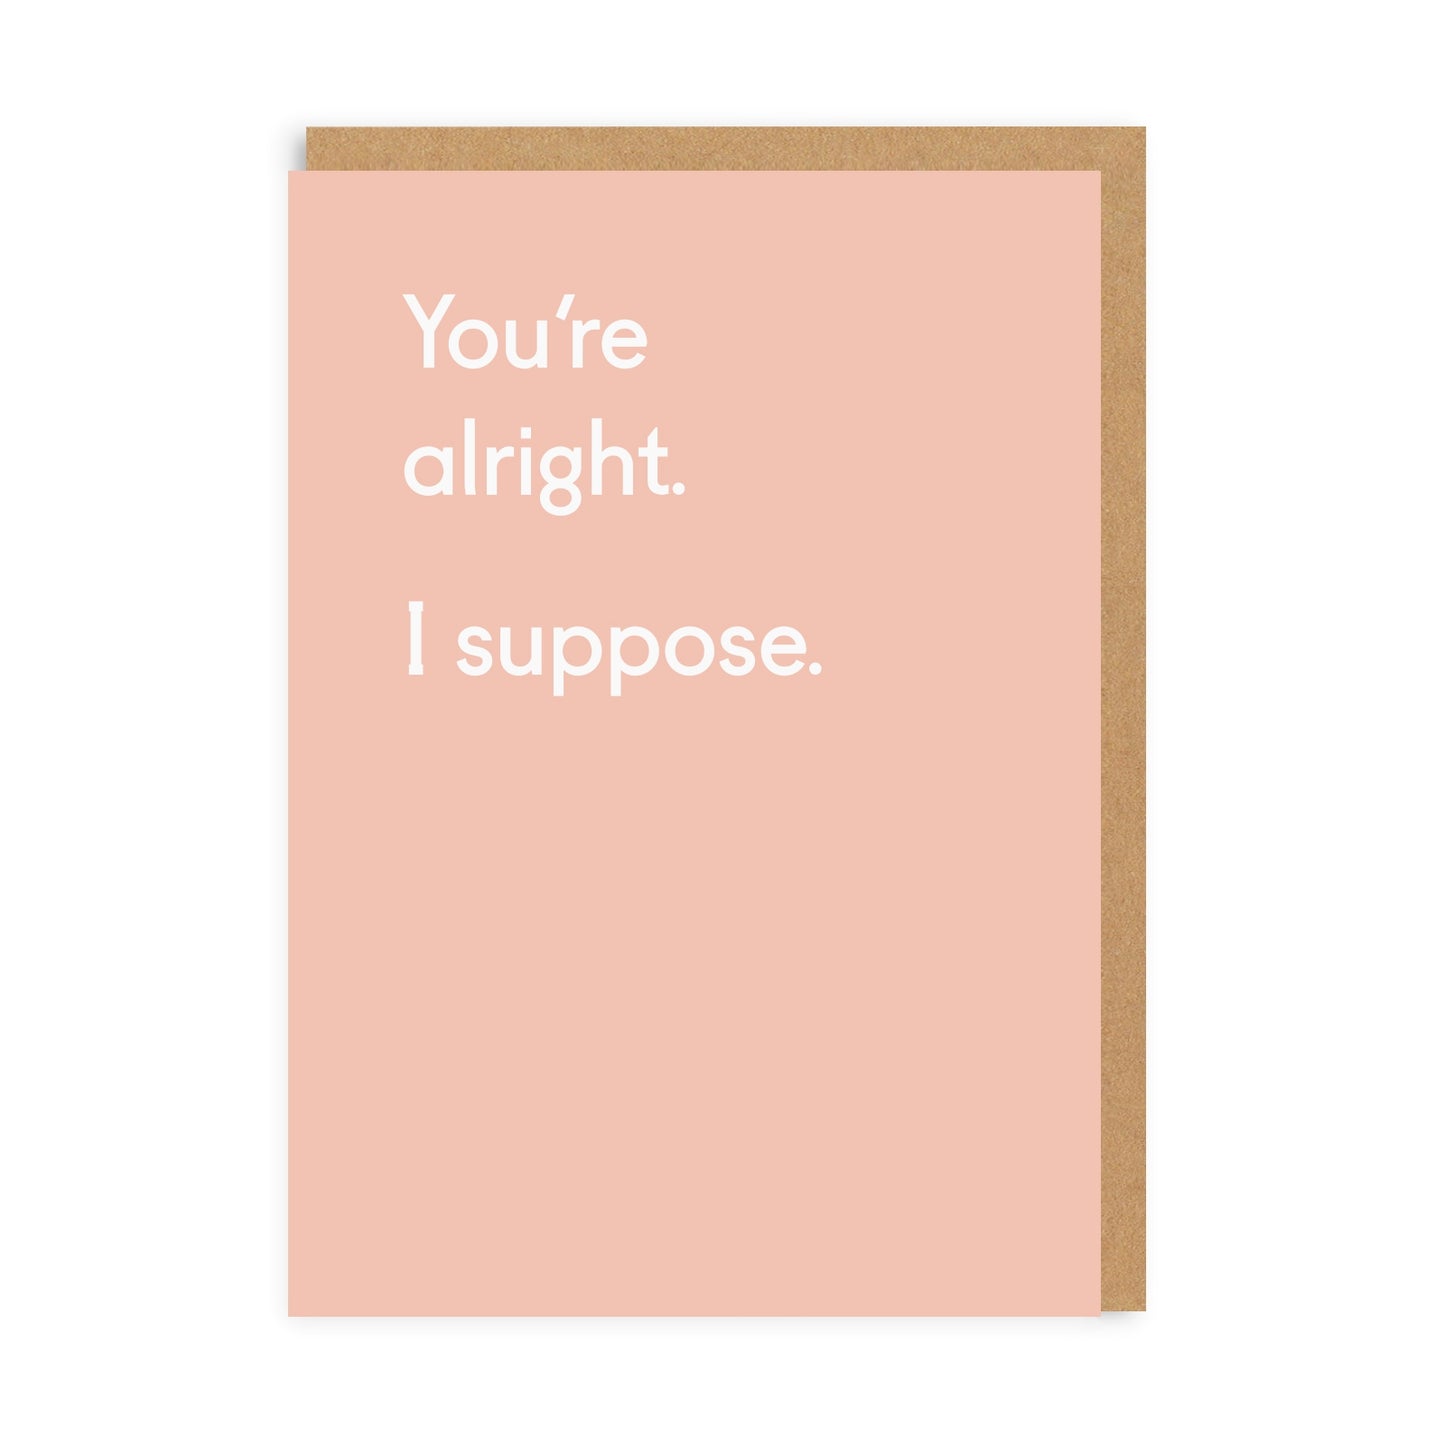 You're Alright. I suppose. Greeting Card